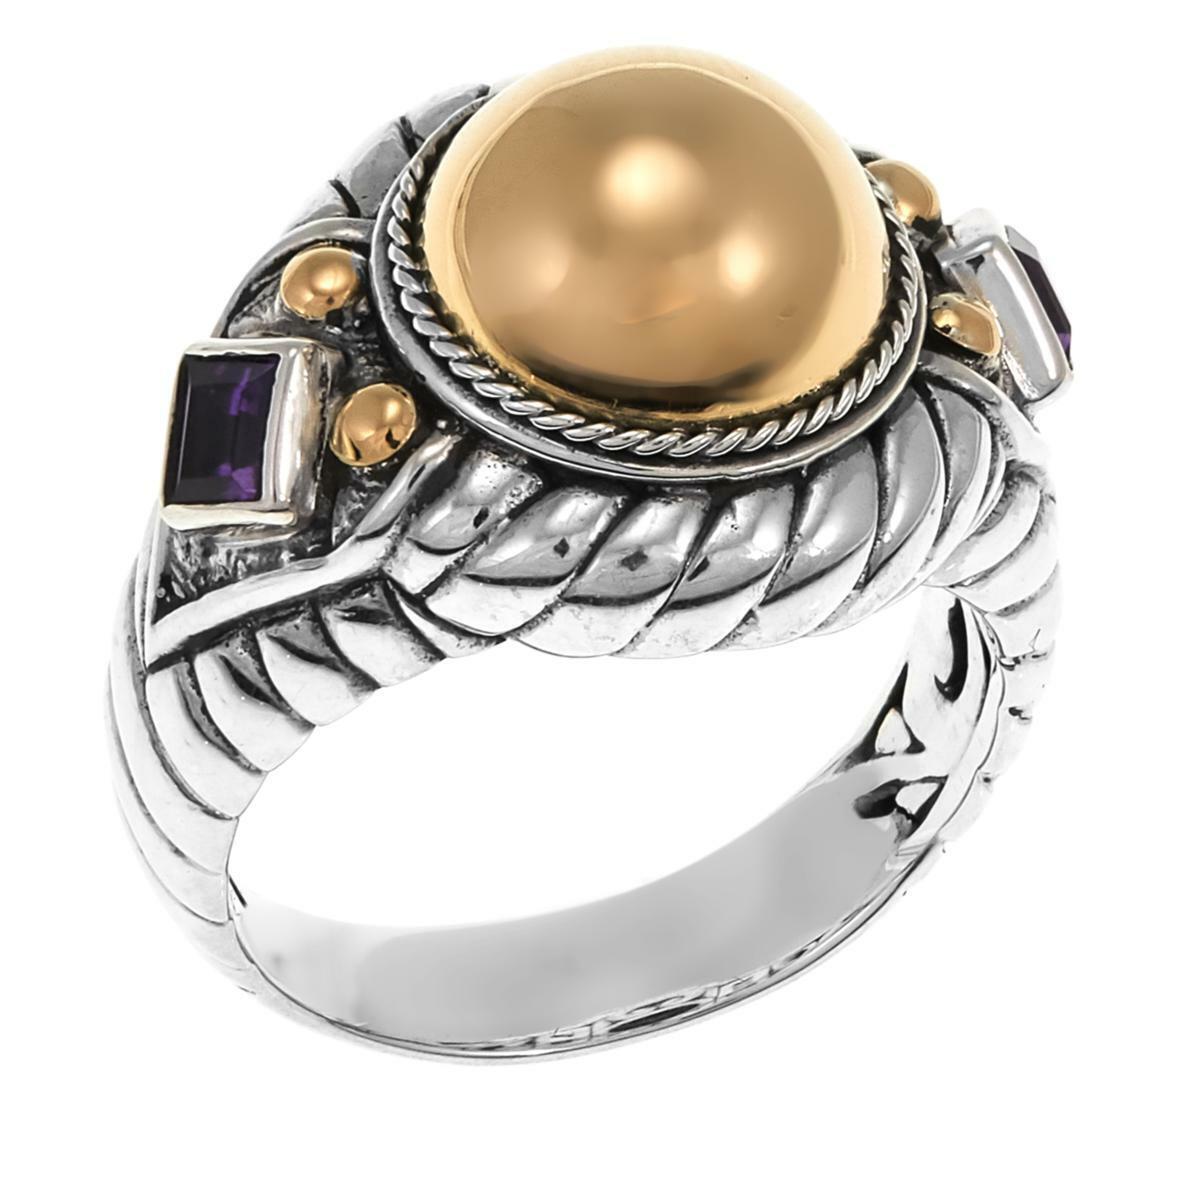 Bali Designs 2-Tone 0.22Ctw Amethyst Cable-Twist Ring Size 8 Hsn $221